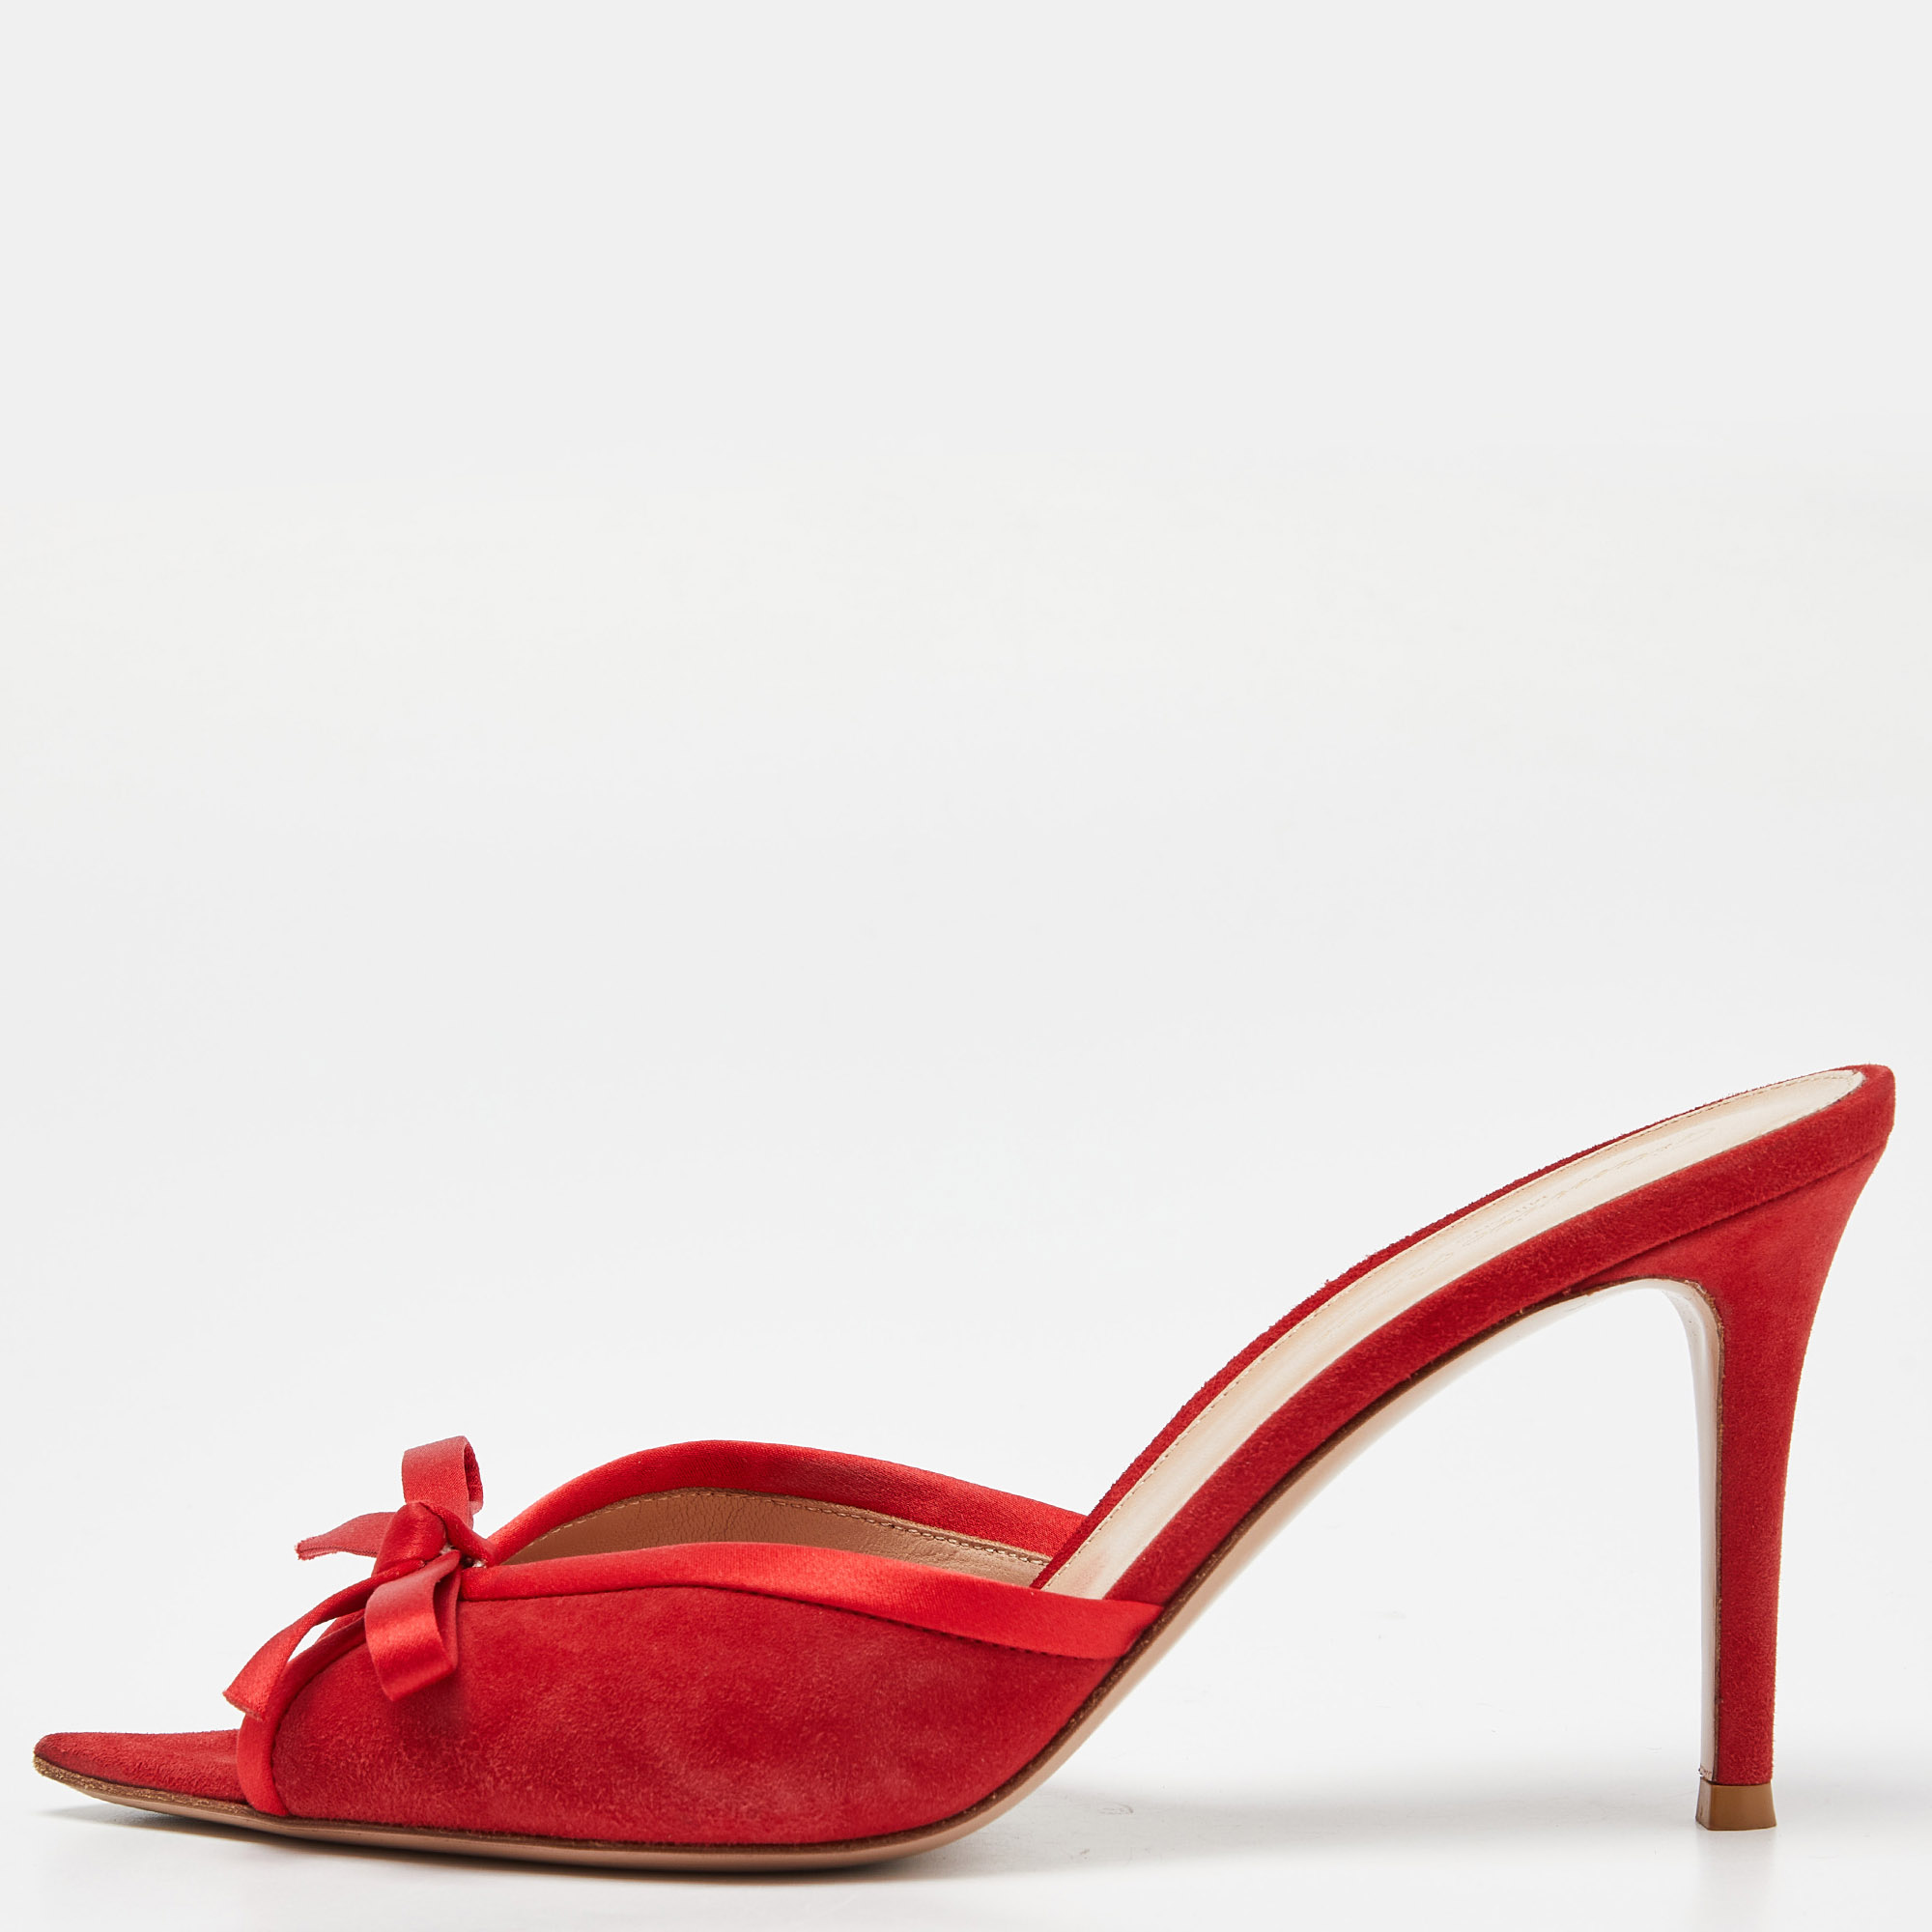 Pre-owned Gianvito Rossi Red Suede Bow Slide Sandals Size 38.5